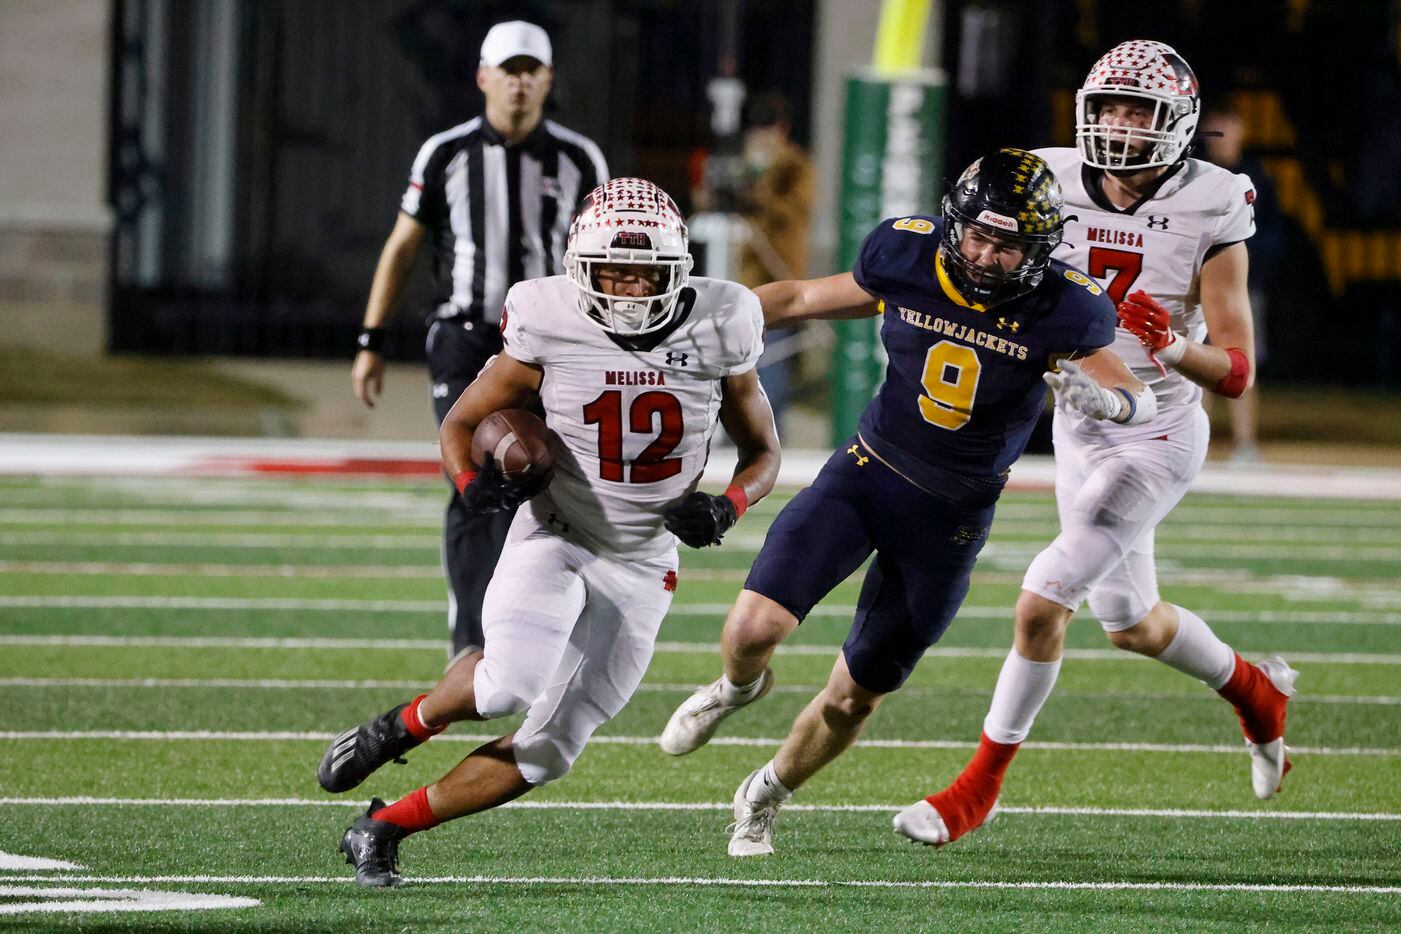 Melissa running back Ashton Mitchell-Johnson (12) runs past Stephenville’s Corbin Poston (9) during the first half of a Class 4A Division I Region II final high school football game in Bedford, Texas on Friday, Dec. 3, 2021. (Michael Ainsworth/Special Contributor)